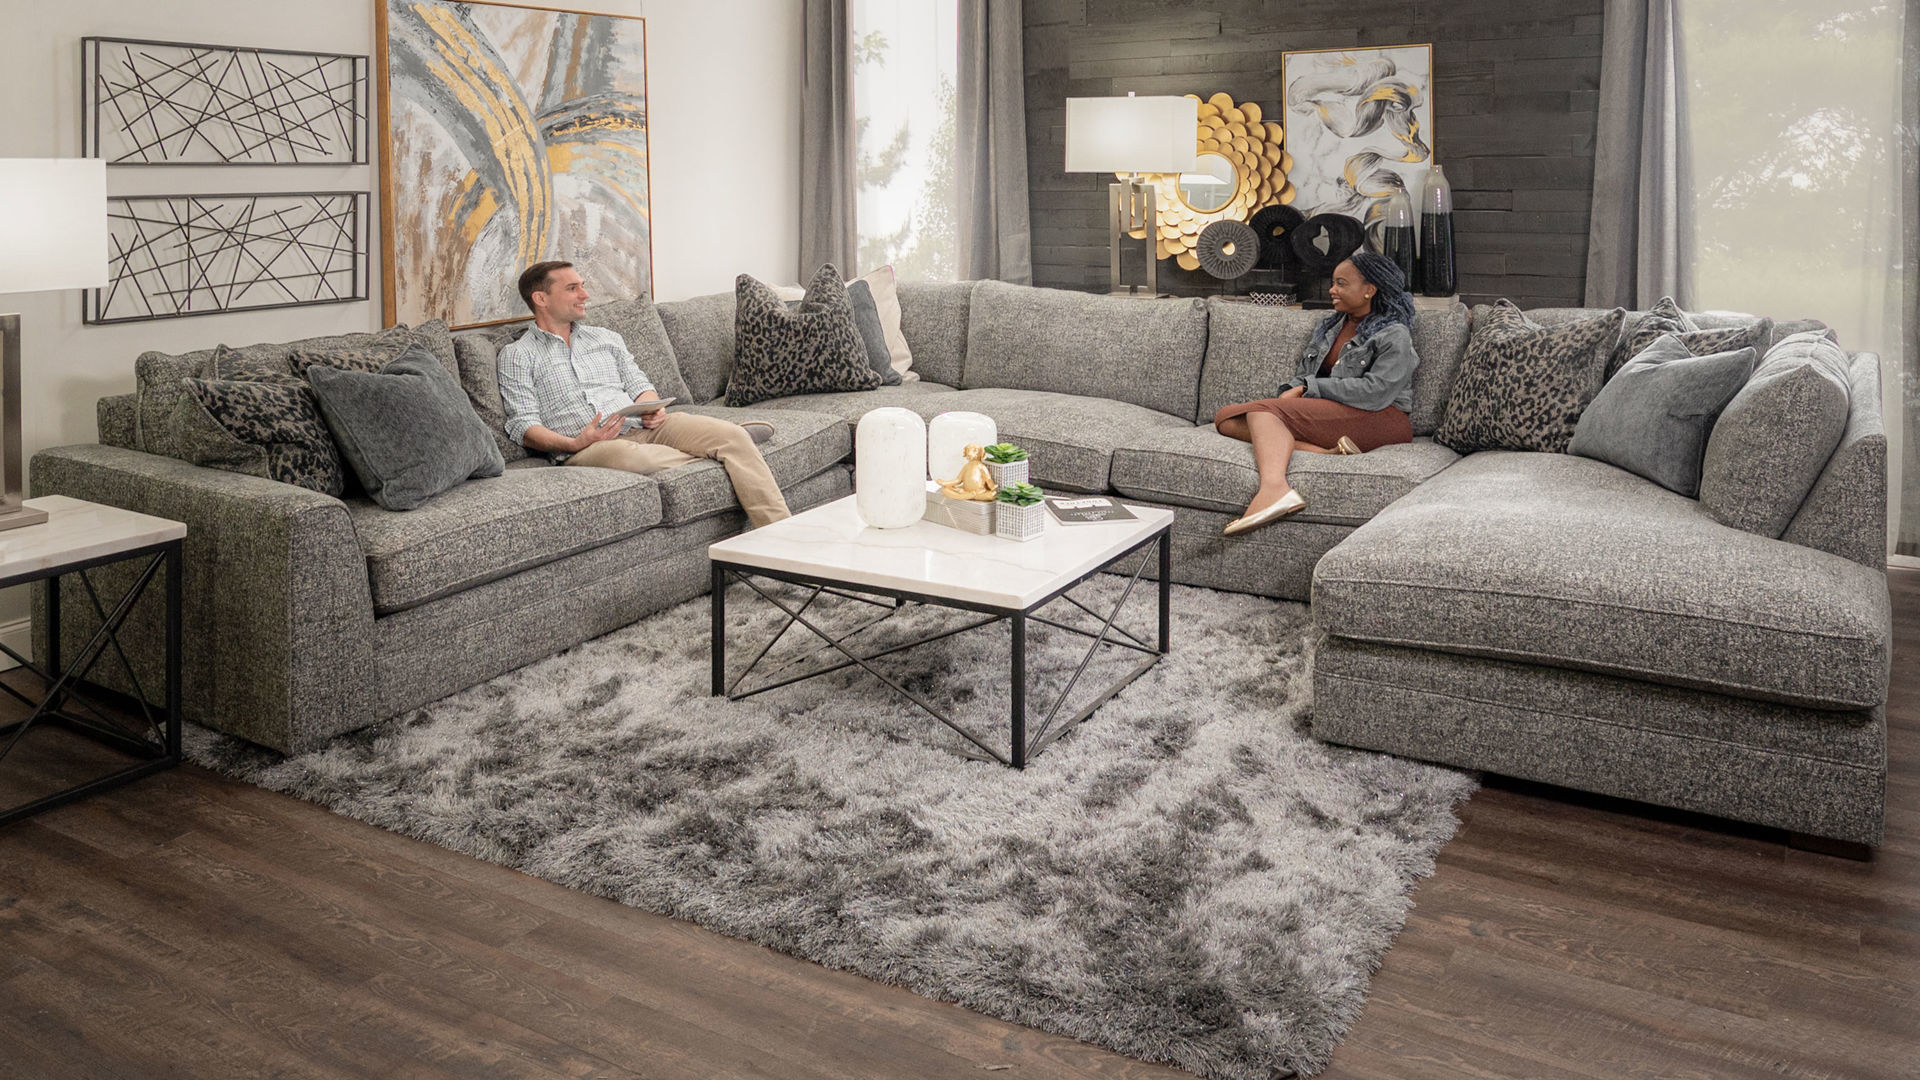 Our House 4 Piece Sectional - Home Zone Furniture - Furniture Stores  serving Dallas, Fort Worth and Northeast Texas | Mattress Sets, Living Room  Furniture, Bedroom Furniture